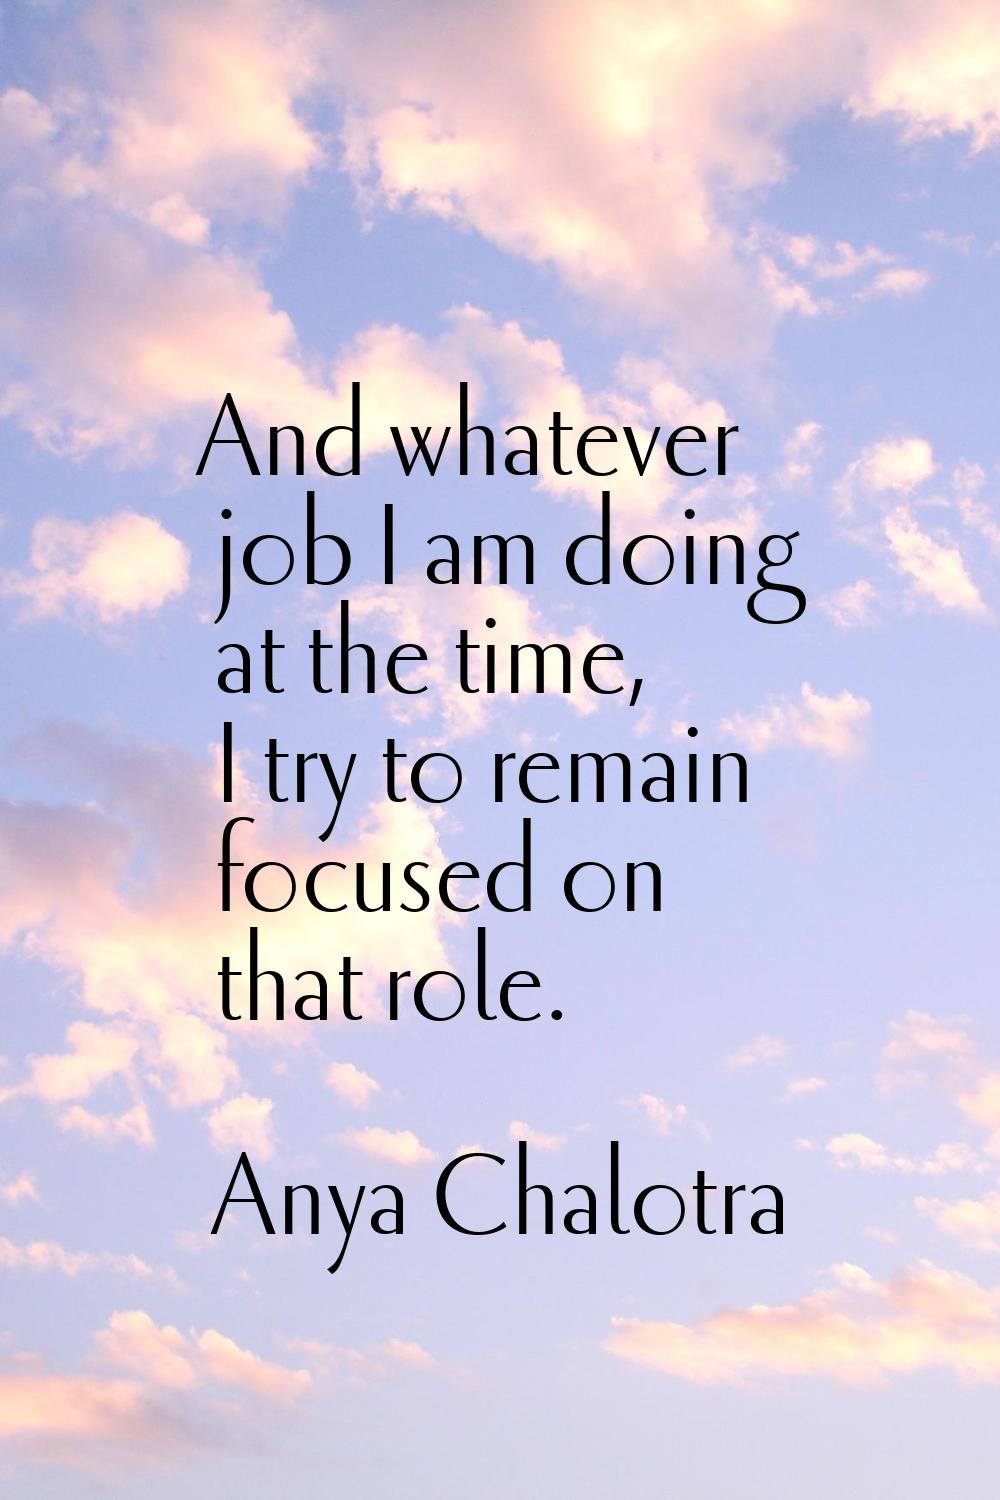 And whatever job I am doing at the time, I try to remain focused on that role.